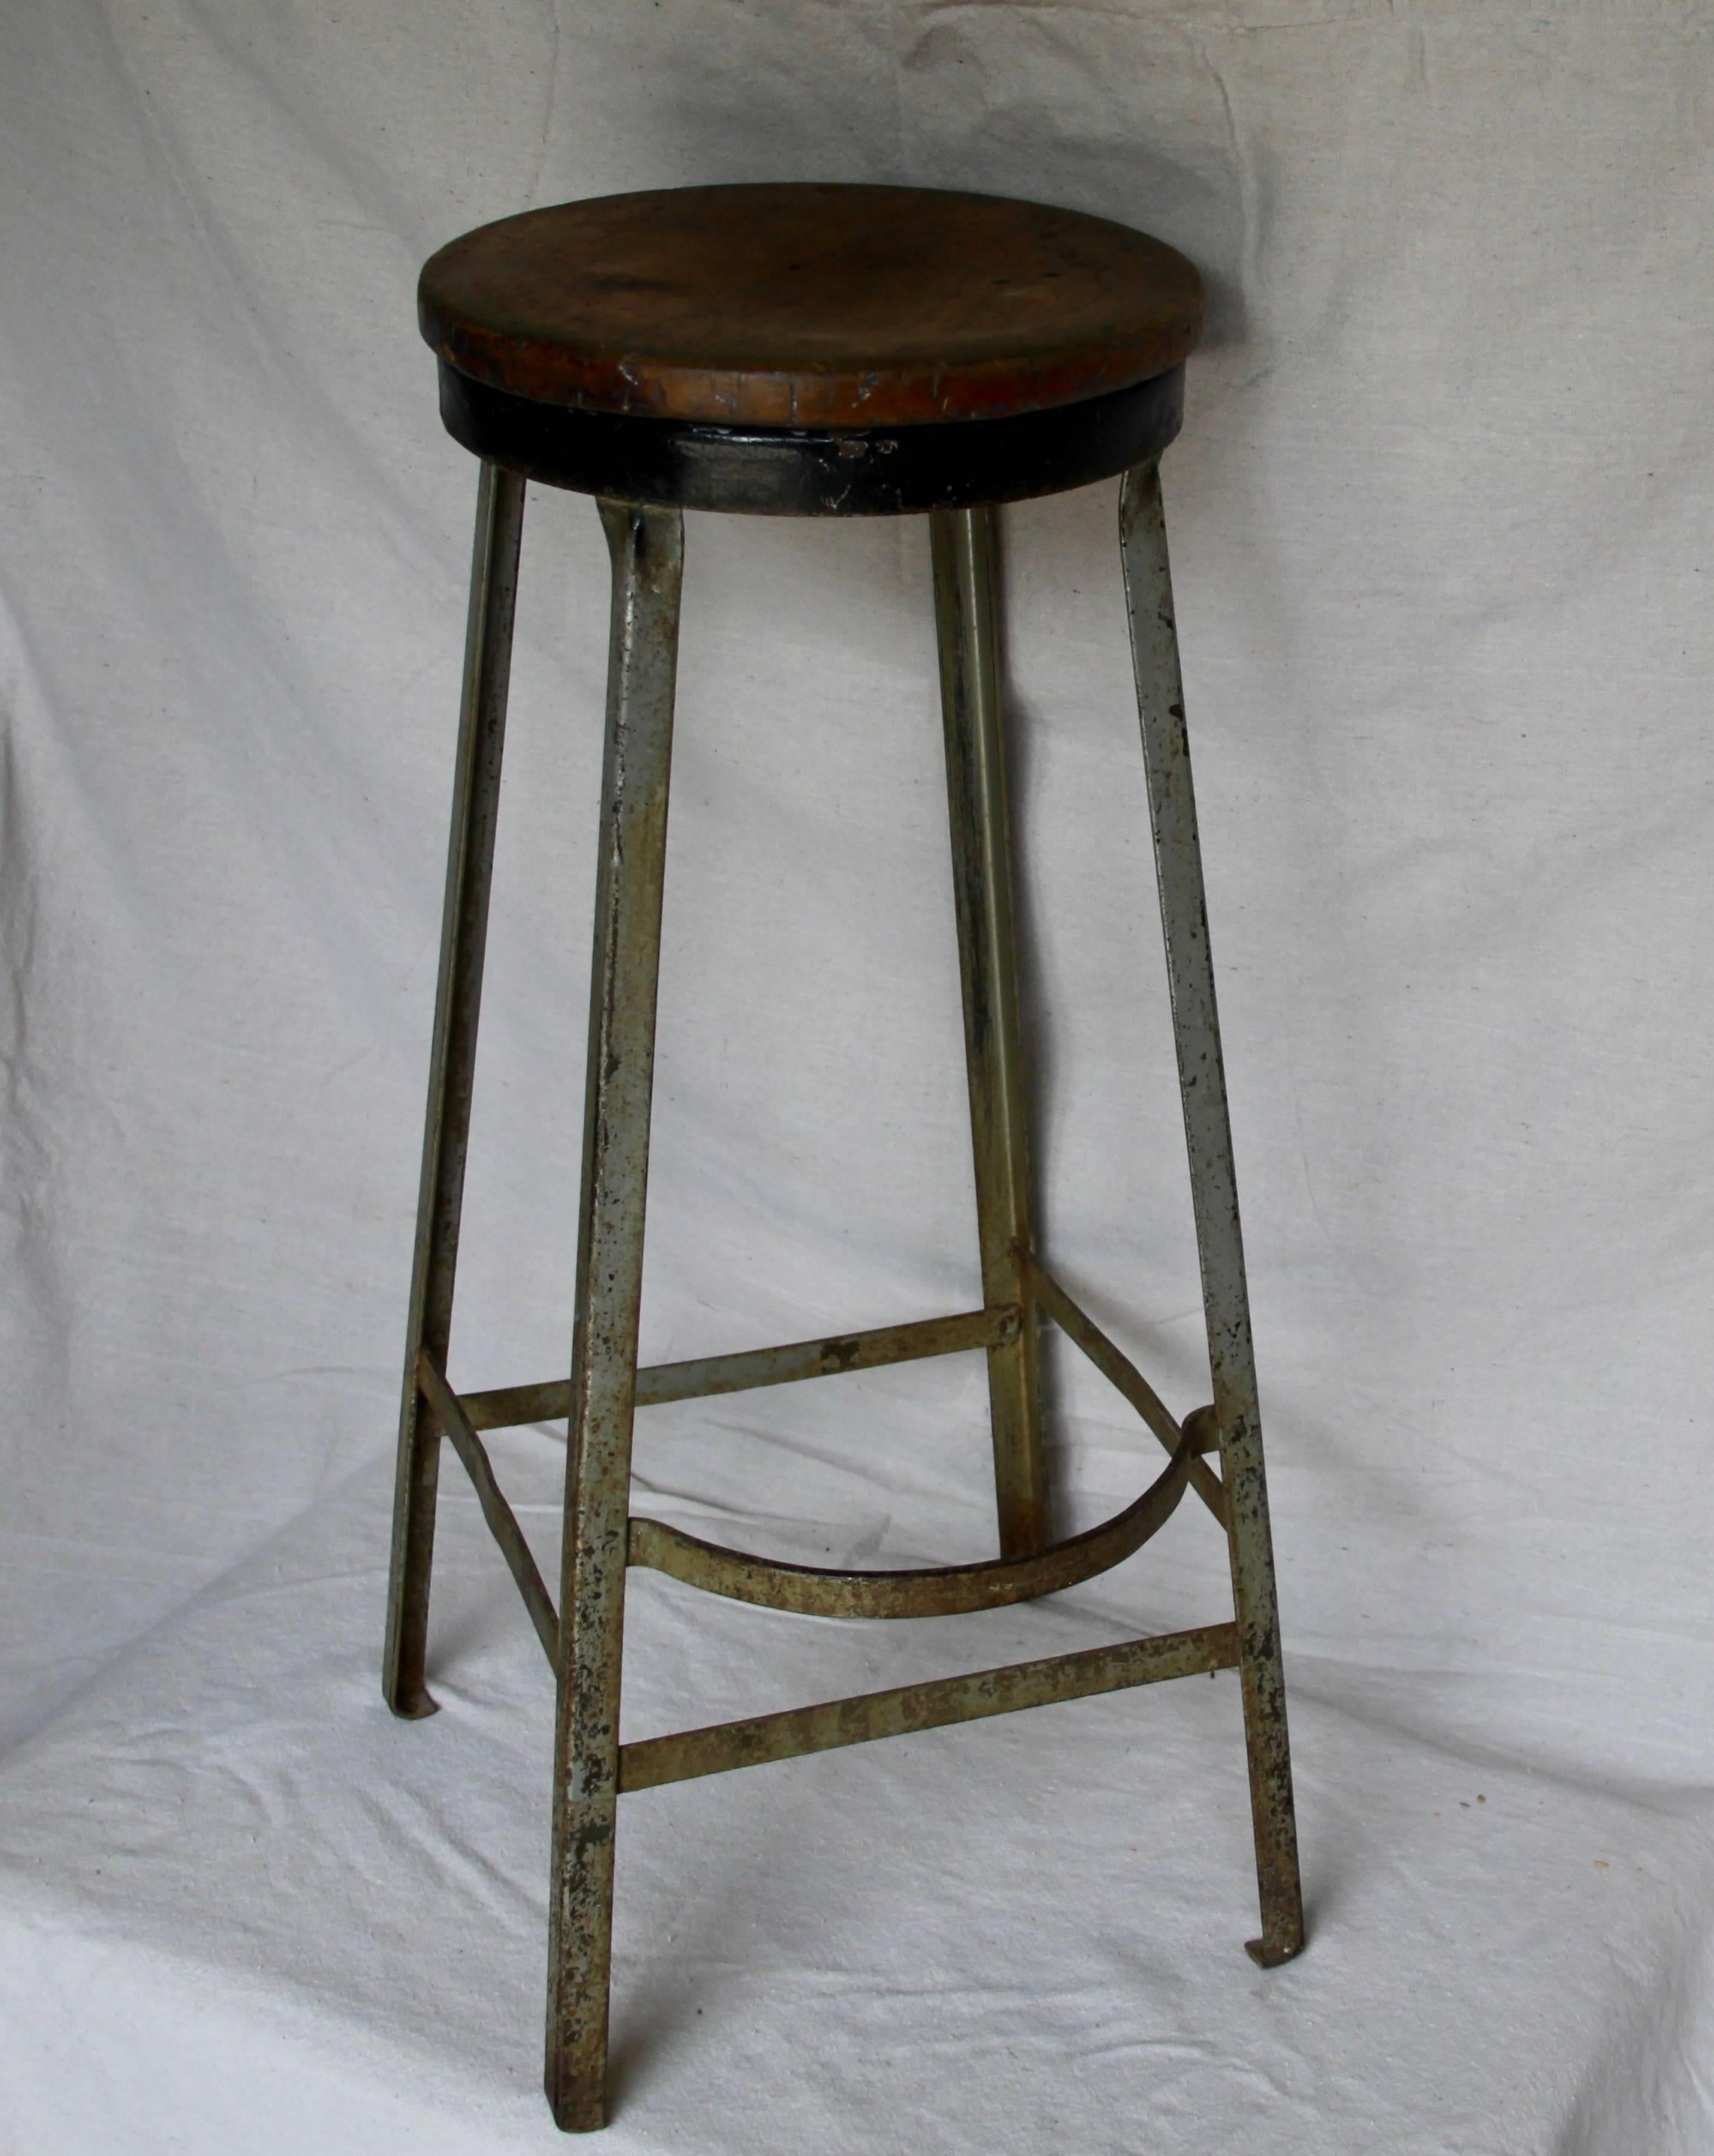 A wonderful vintage stool found in France. A 13 inch diameter wood seat on black metal with grey metal legs and footrest. Great character.